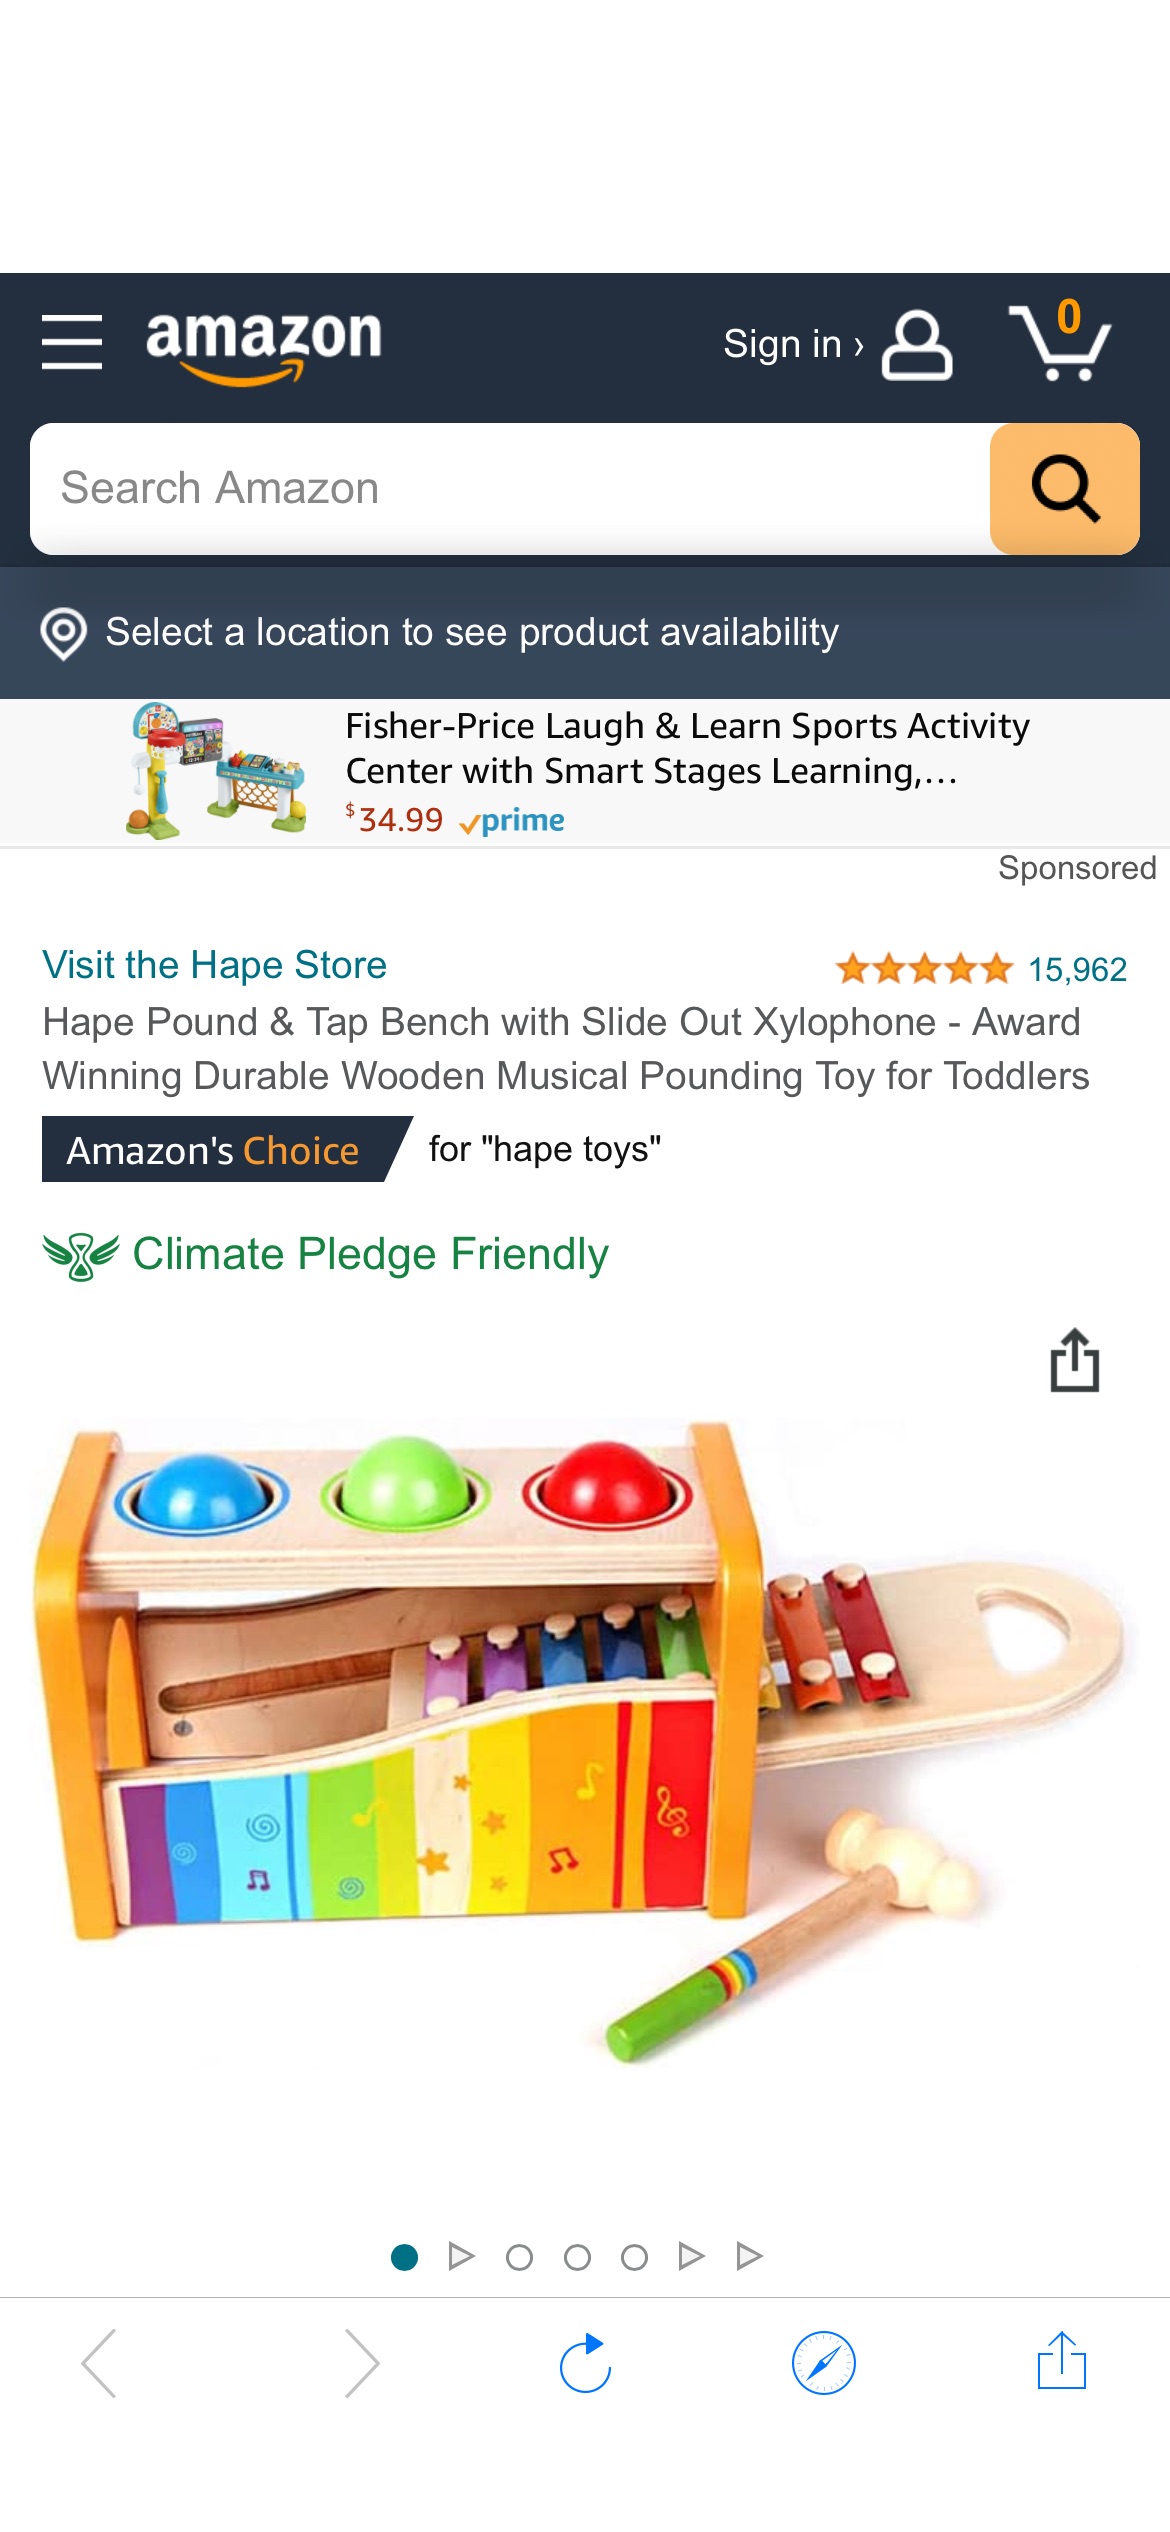 Amazon.com: Hape Pound & Tap Bench with Slide Out Xylophone - Award Winning Durable Wooden Musical Pounding Toy for Toddlers : Clothing, Shoes & Jewelry